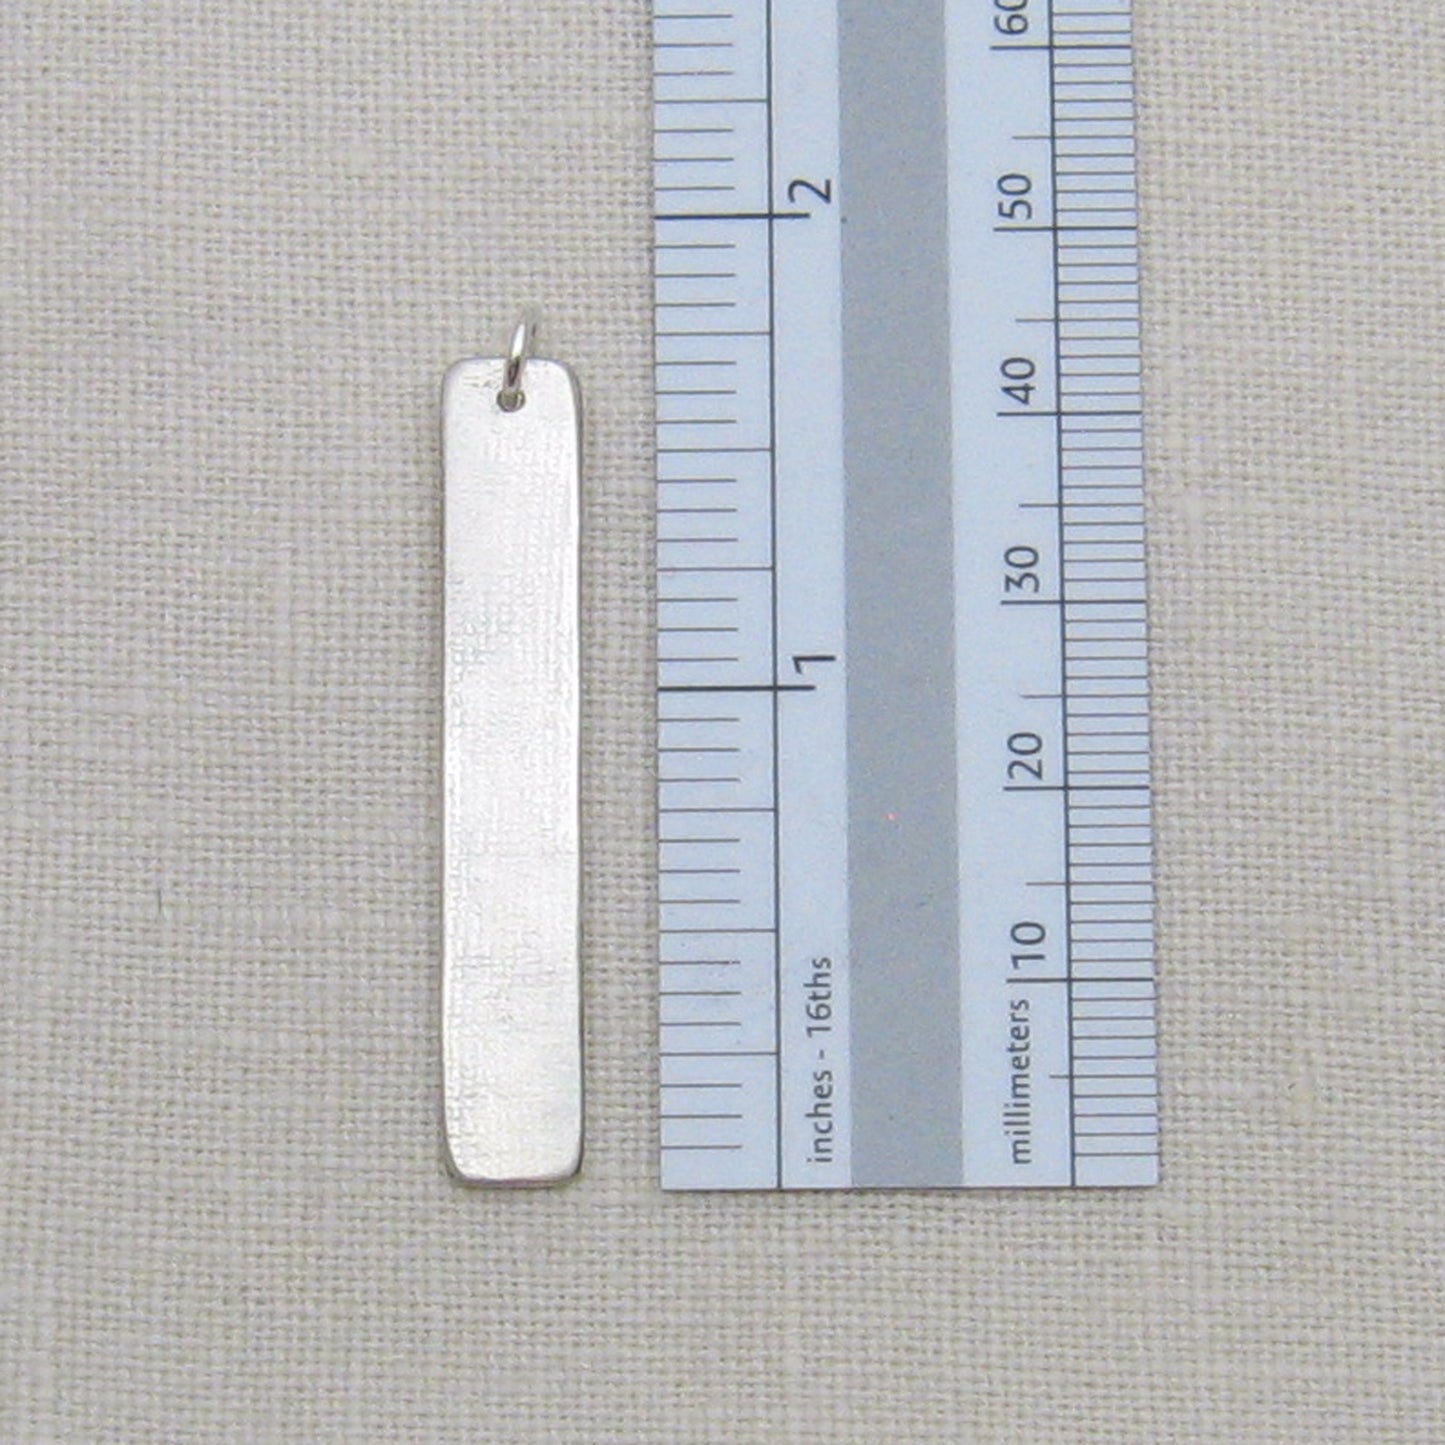 Braille Bar Pendant back shown with ruler for size reference